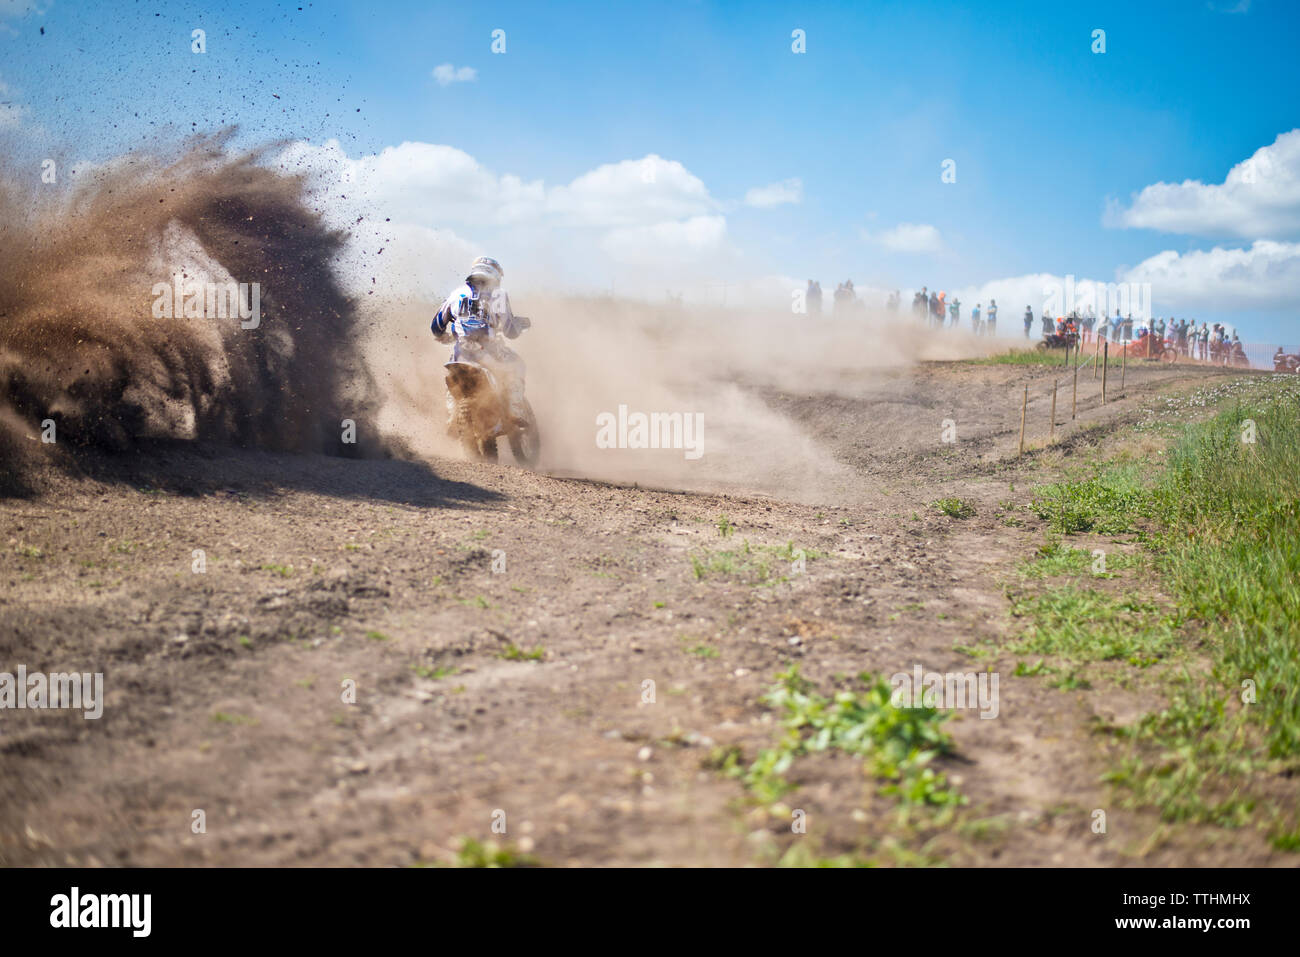 Rear view of man riding motorcycle on dirt road against sky Stock Photo